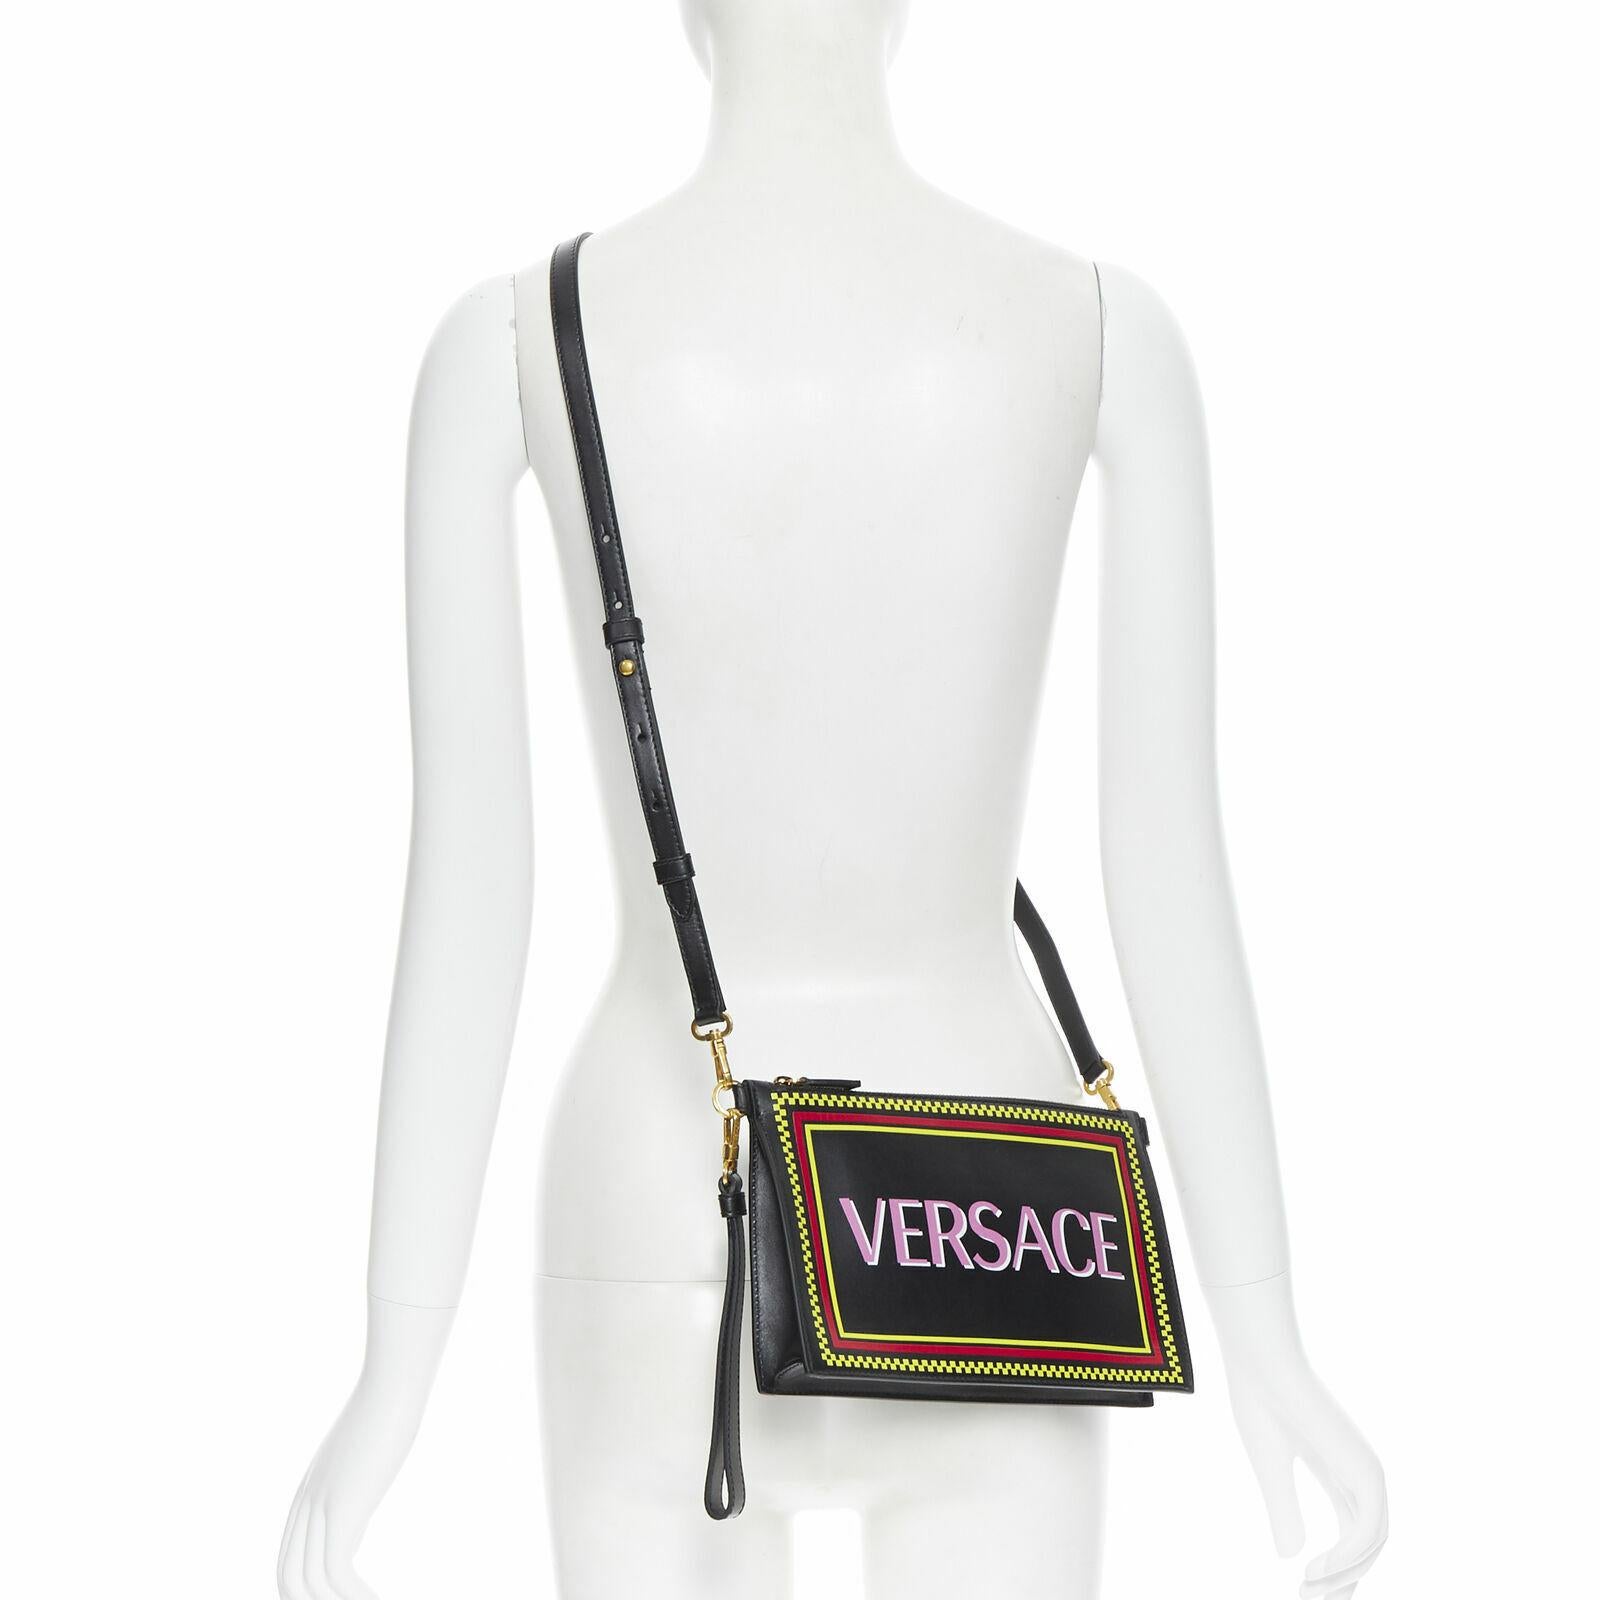 new VERSACE 90s graphic logo black calf zip pouch crossbody clutch bag
Reference: TGAS/B00511
Brand: Versace
Designer: Donatella Versace
Model: 90's logo top zip crossbody pouch
Collection: 90's Vintage Logo
Material: Leather
Color: Black,